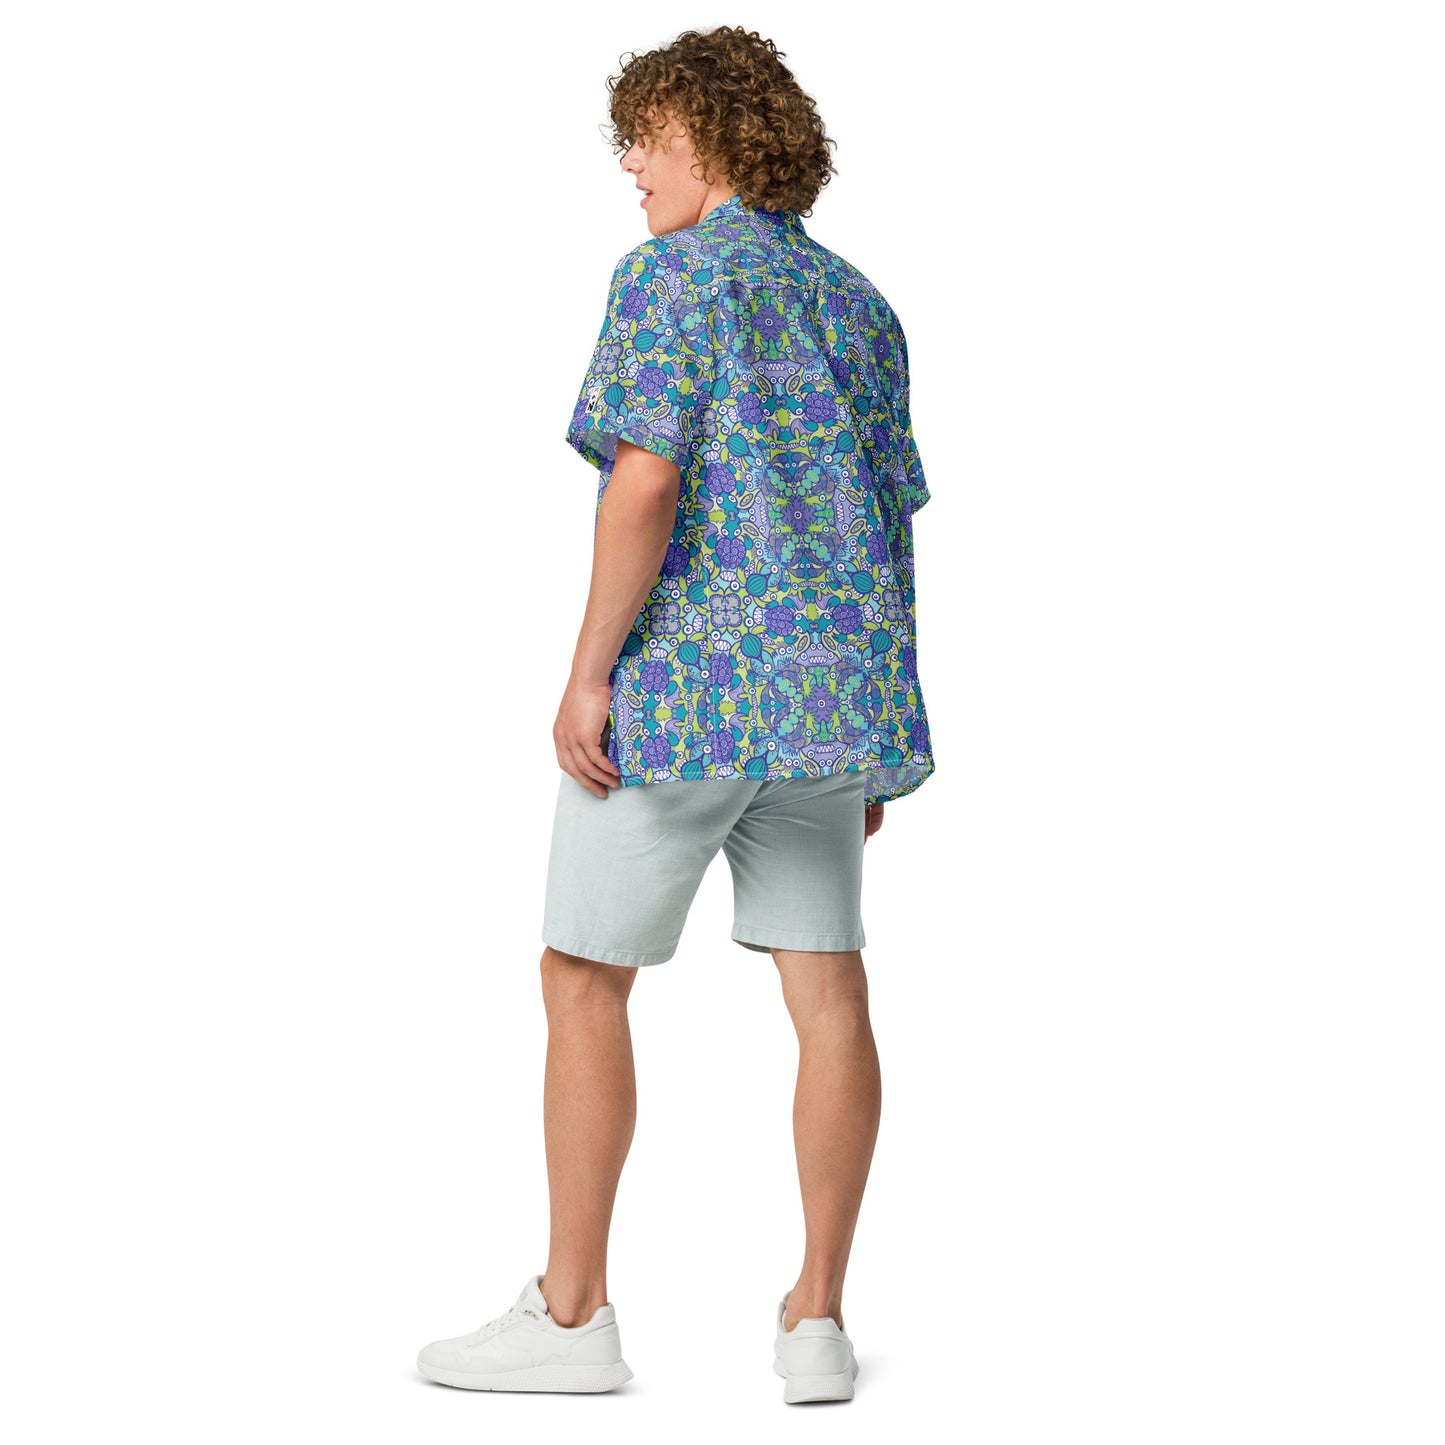 Once upon a time in an ocean full of life - Unisex button shirt. Back view